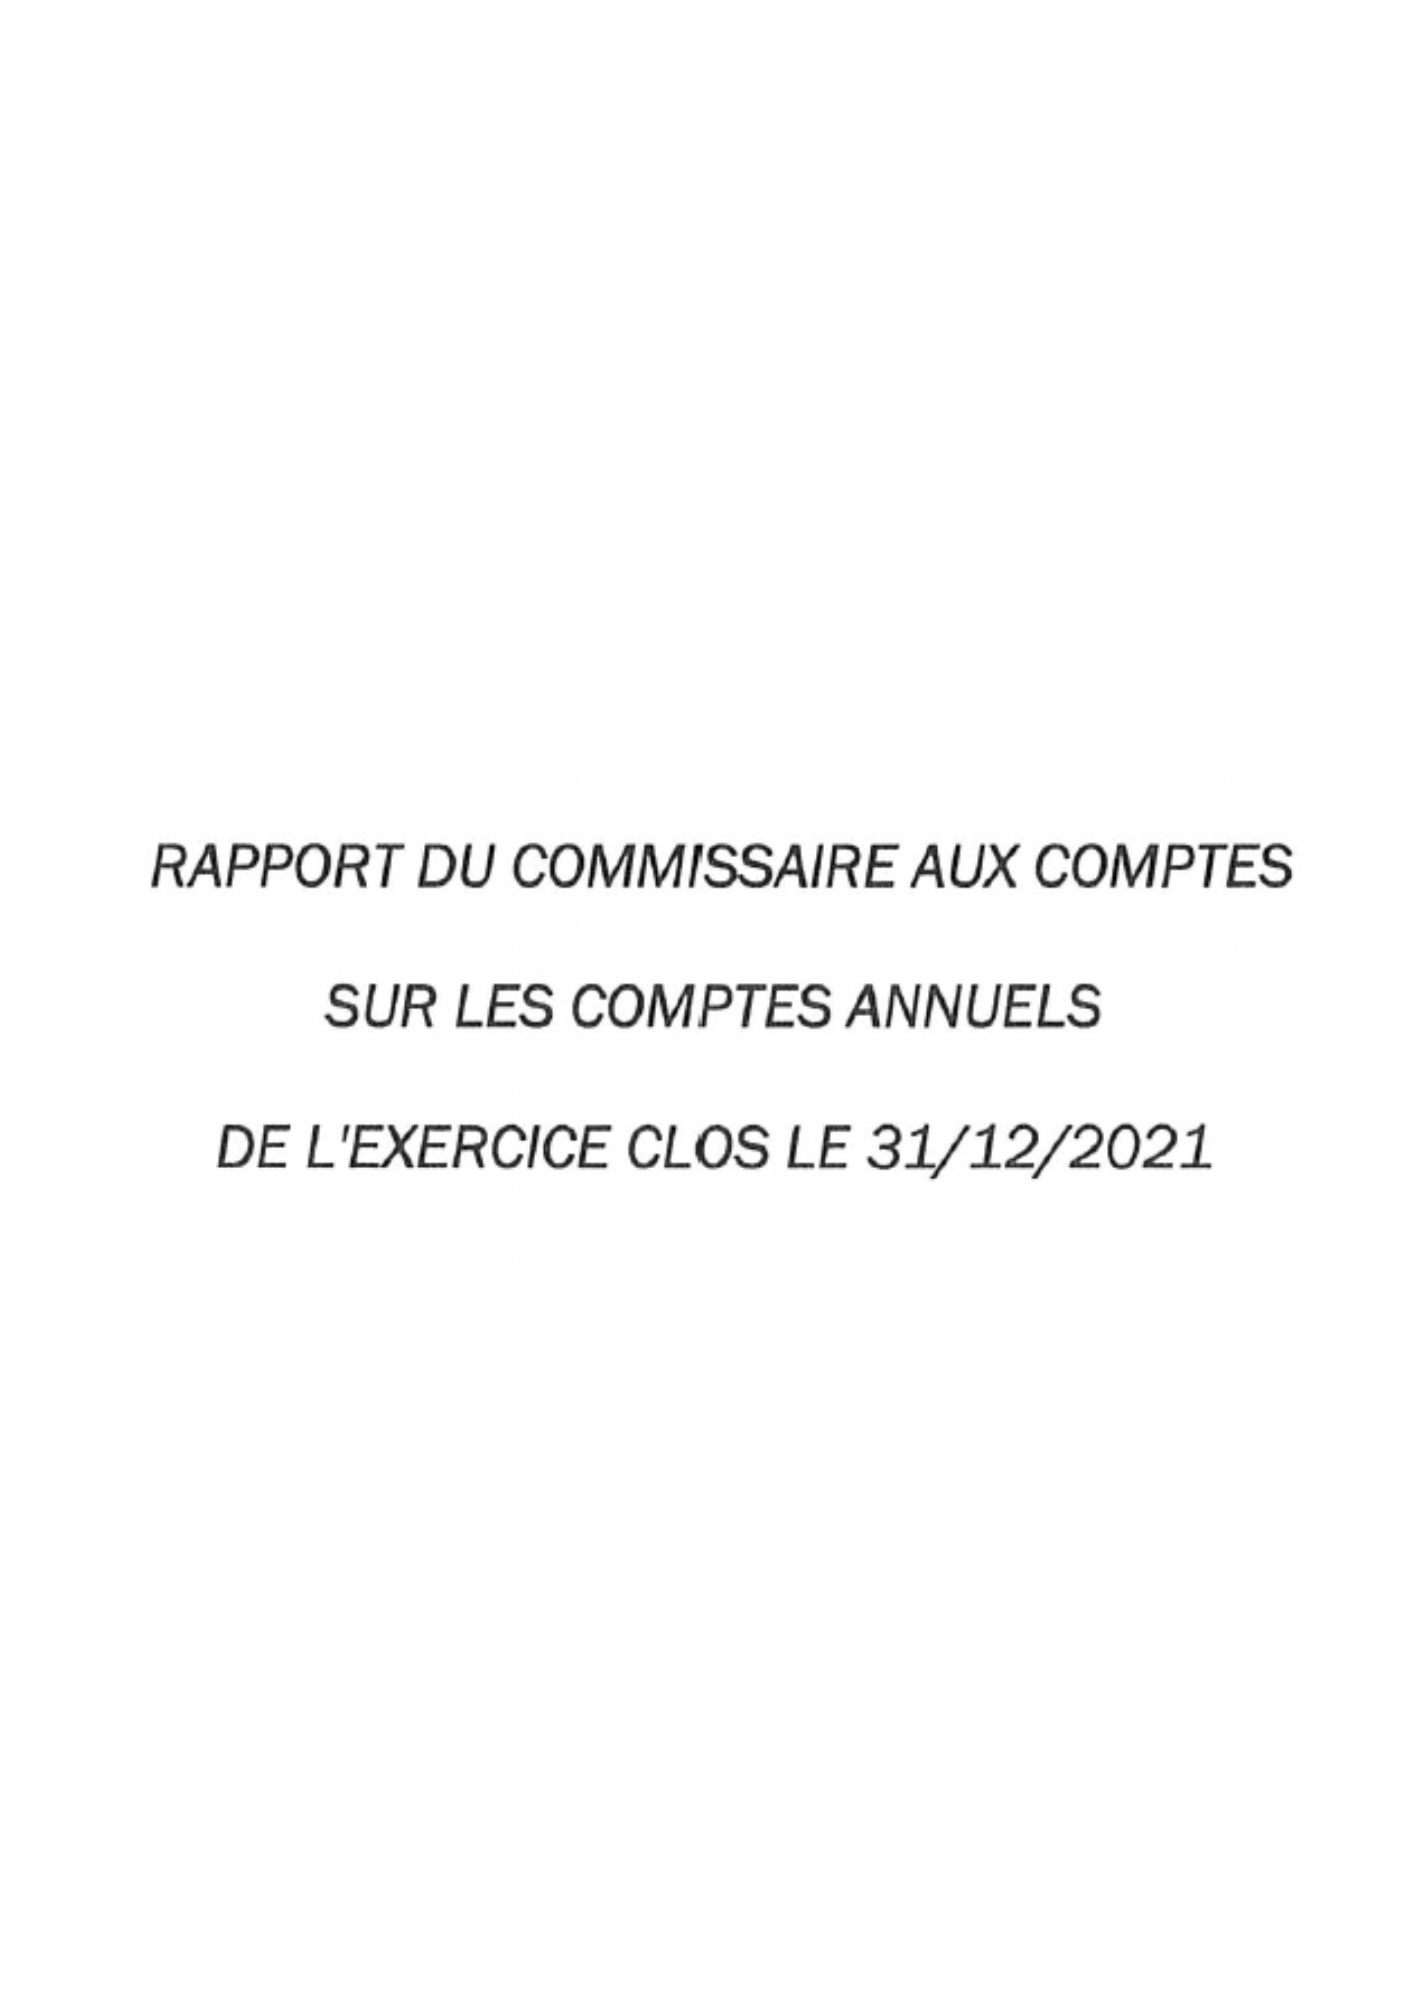 Rapport exercice 2021